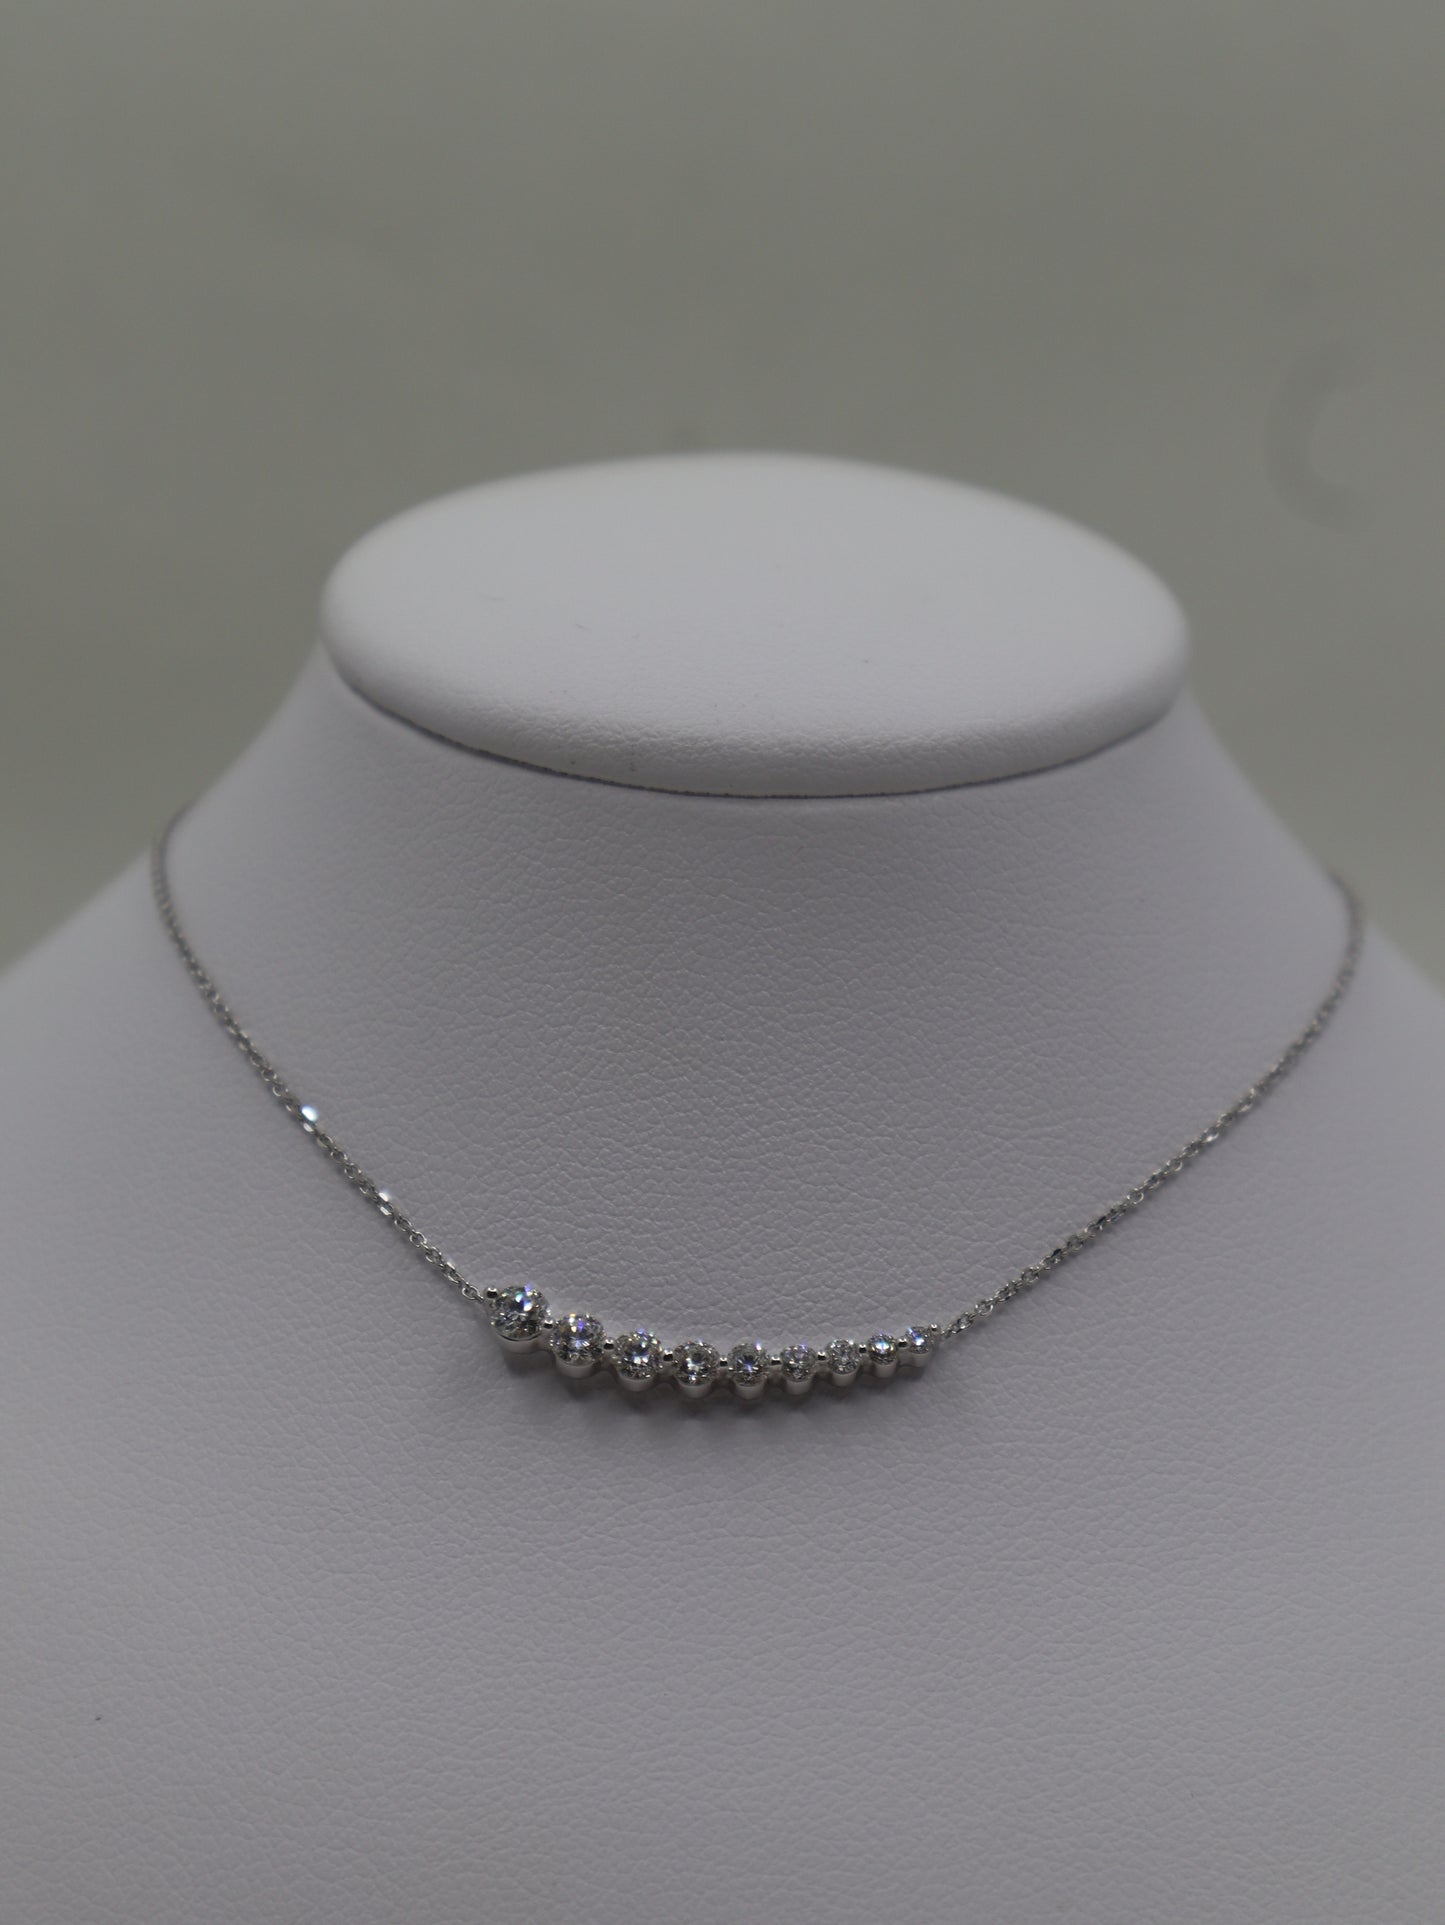 18ct White Gold Diamond Bar Necklet and Chain